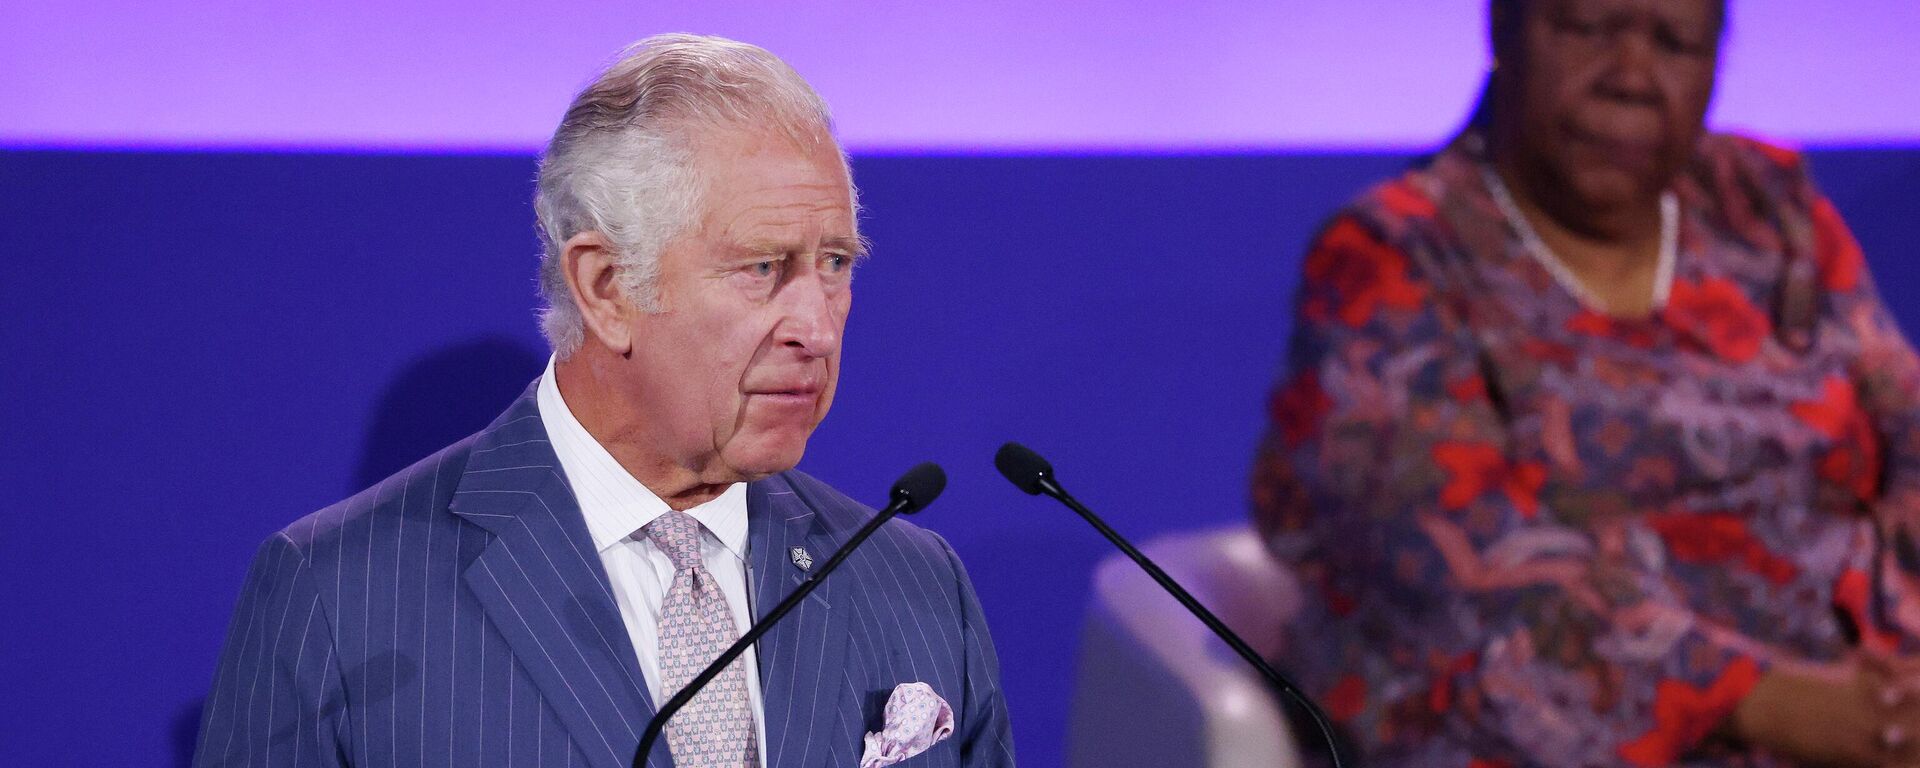 Britain's Prince Charles speaks during the opening ceremony of the Commonwealth Heads of Government Meeting, at the Commonwealth Summit in Kigali, Rwanda Friday, June 24, 2022 - Sputnik International, 1920, 27.06.2022